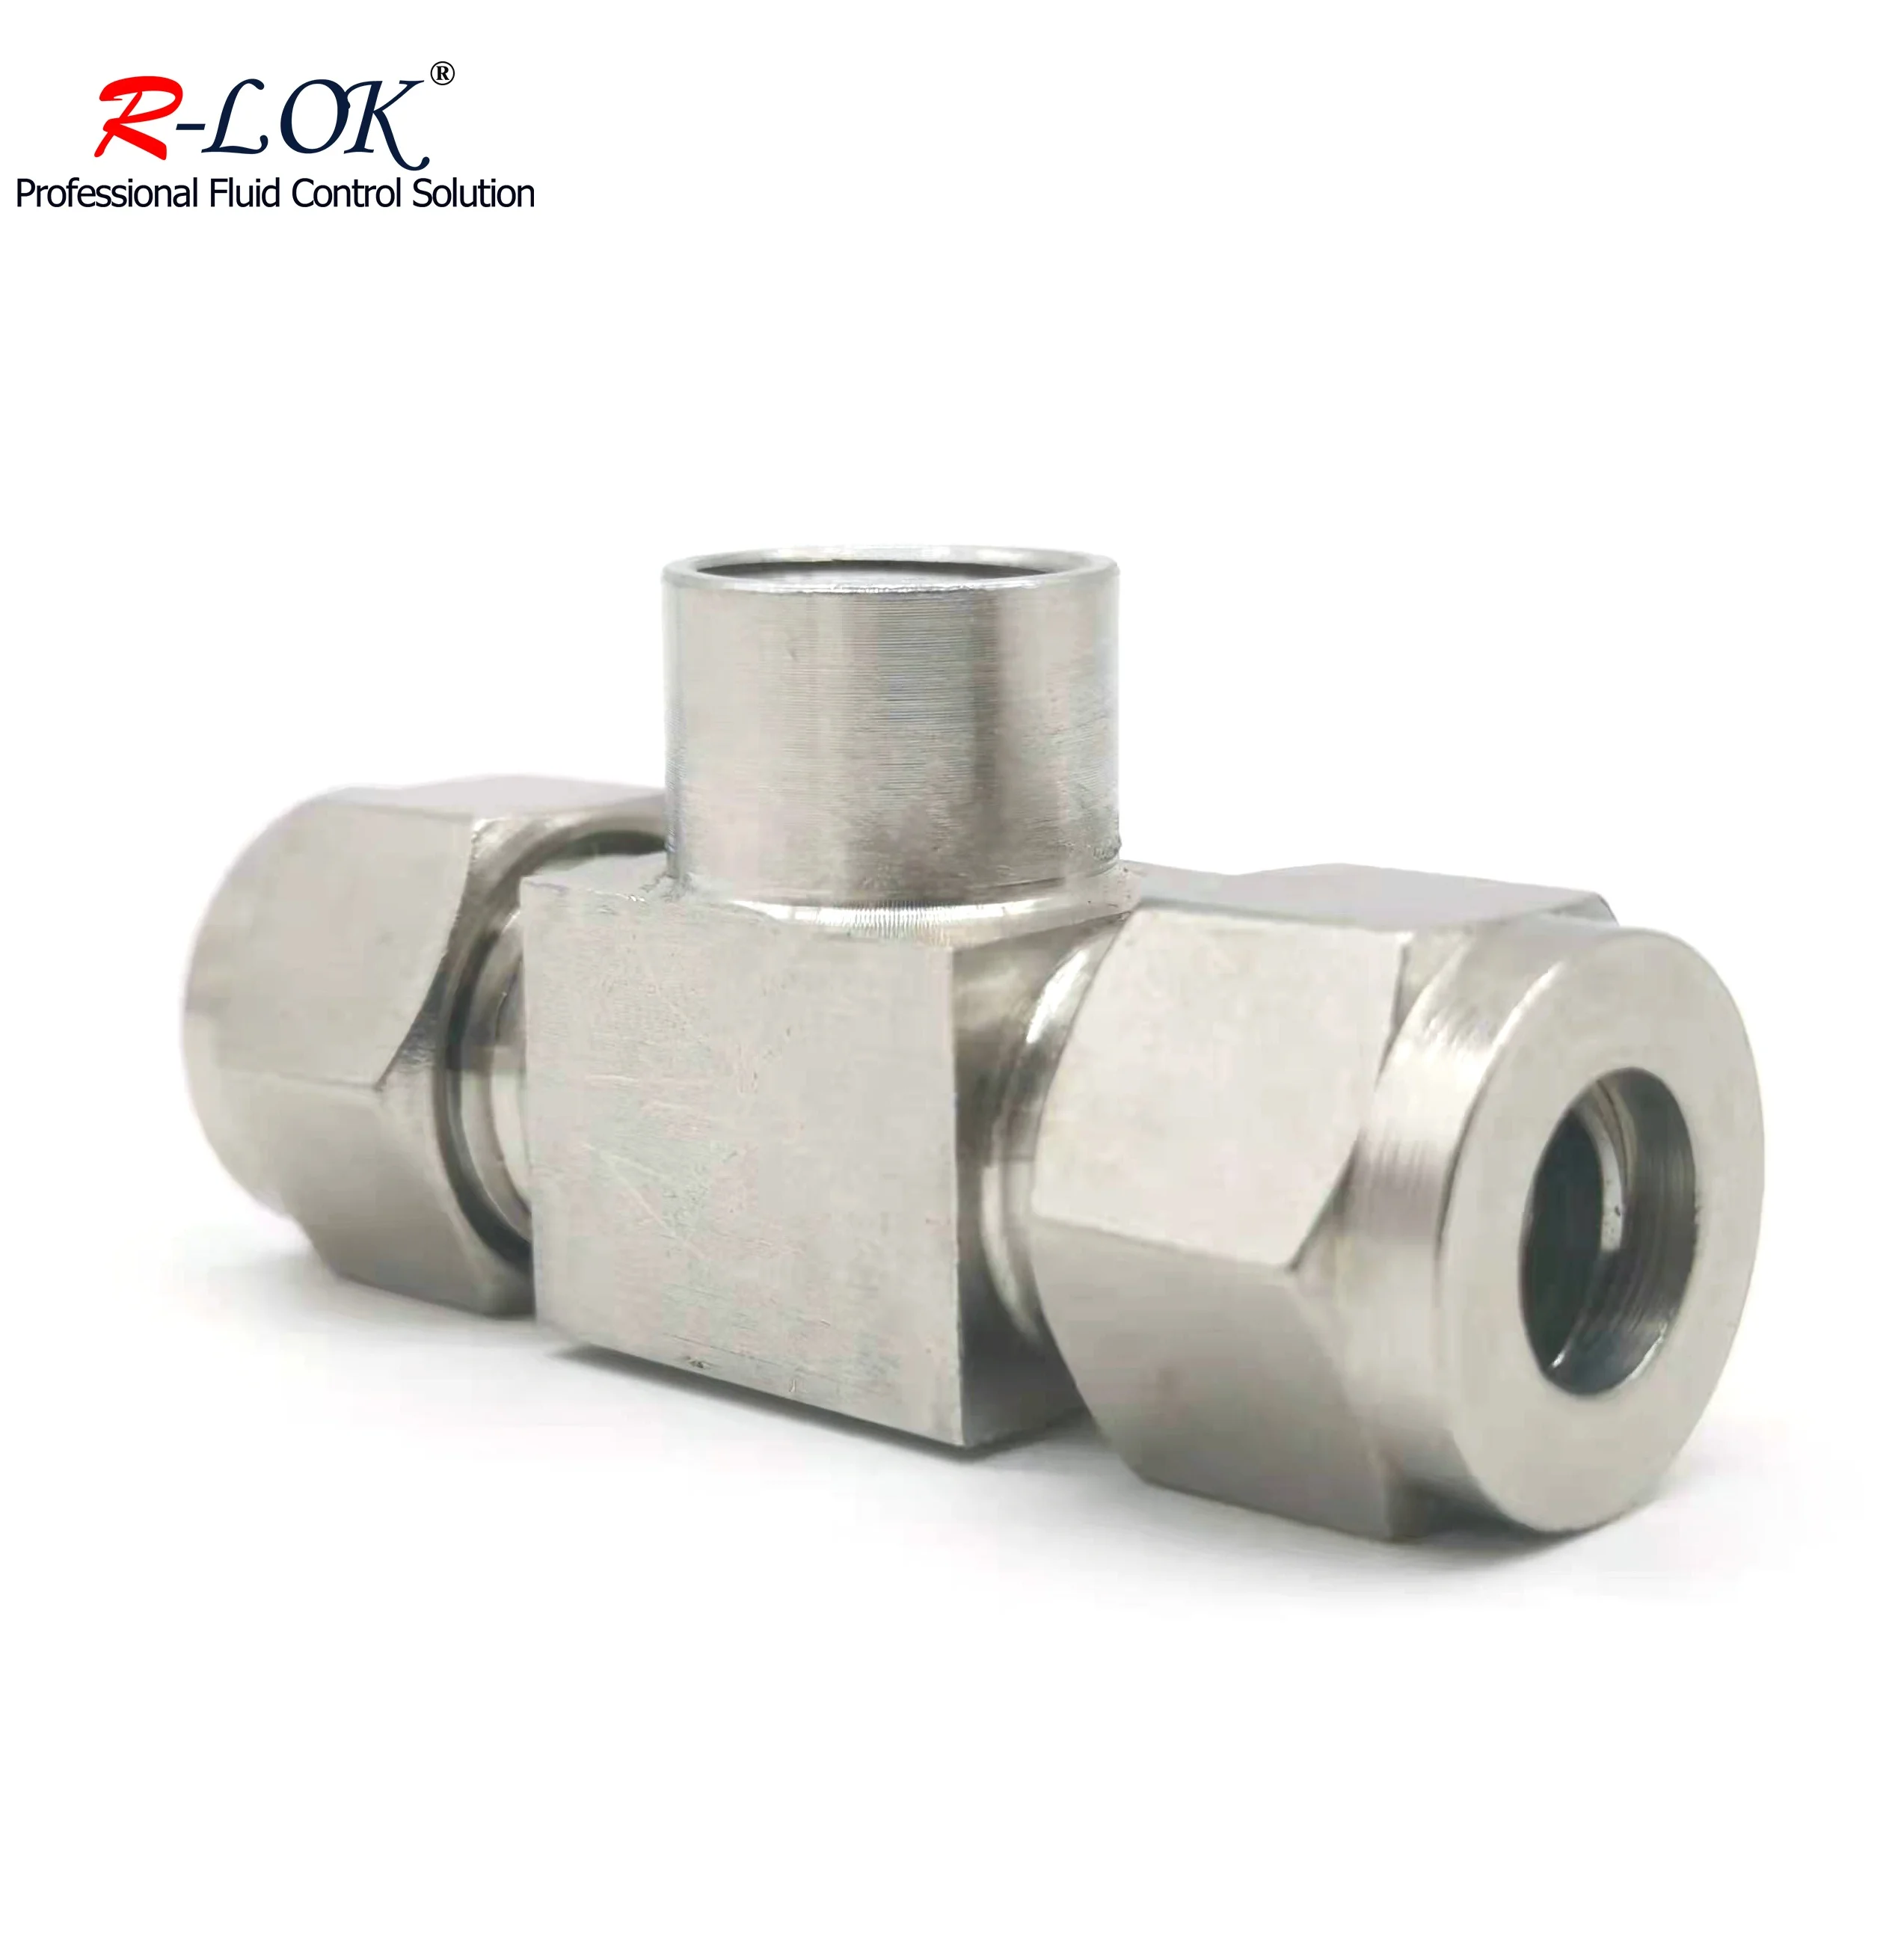 ON SALE Swagelok Tube Fittings Instrumentation Stainless Steel Compression Connector Ss316 Ferrule Female Branch Tee Union